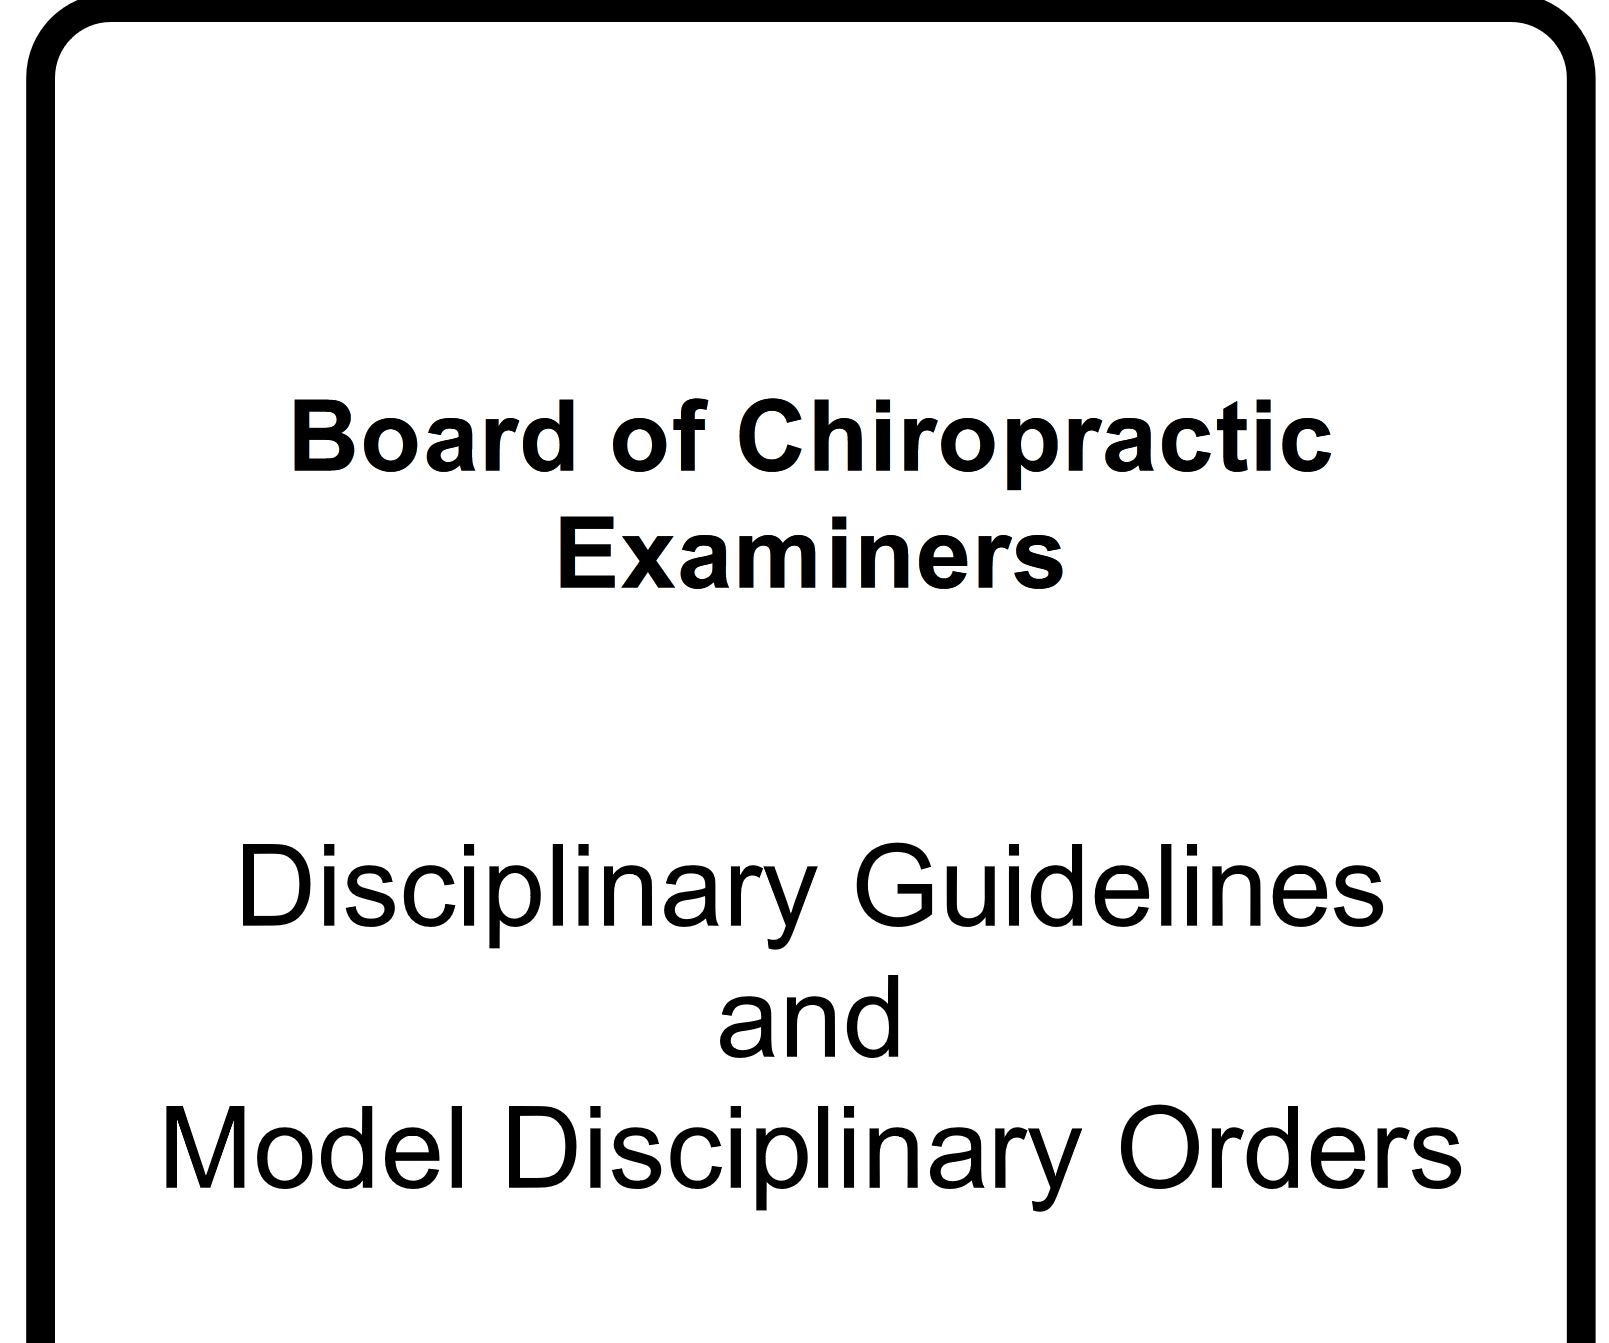 disciplinary guidelines for the board of chiropractic examiners complete volume